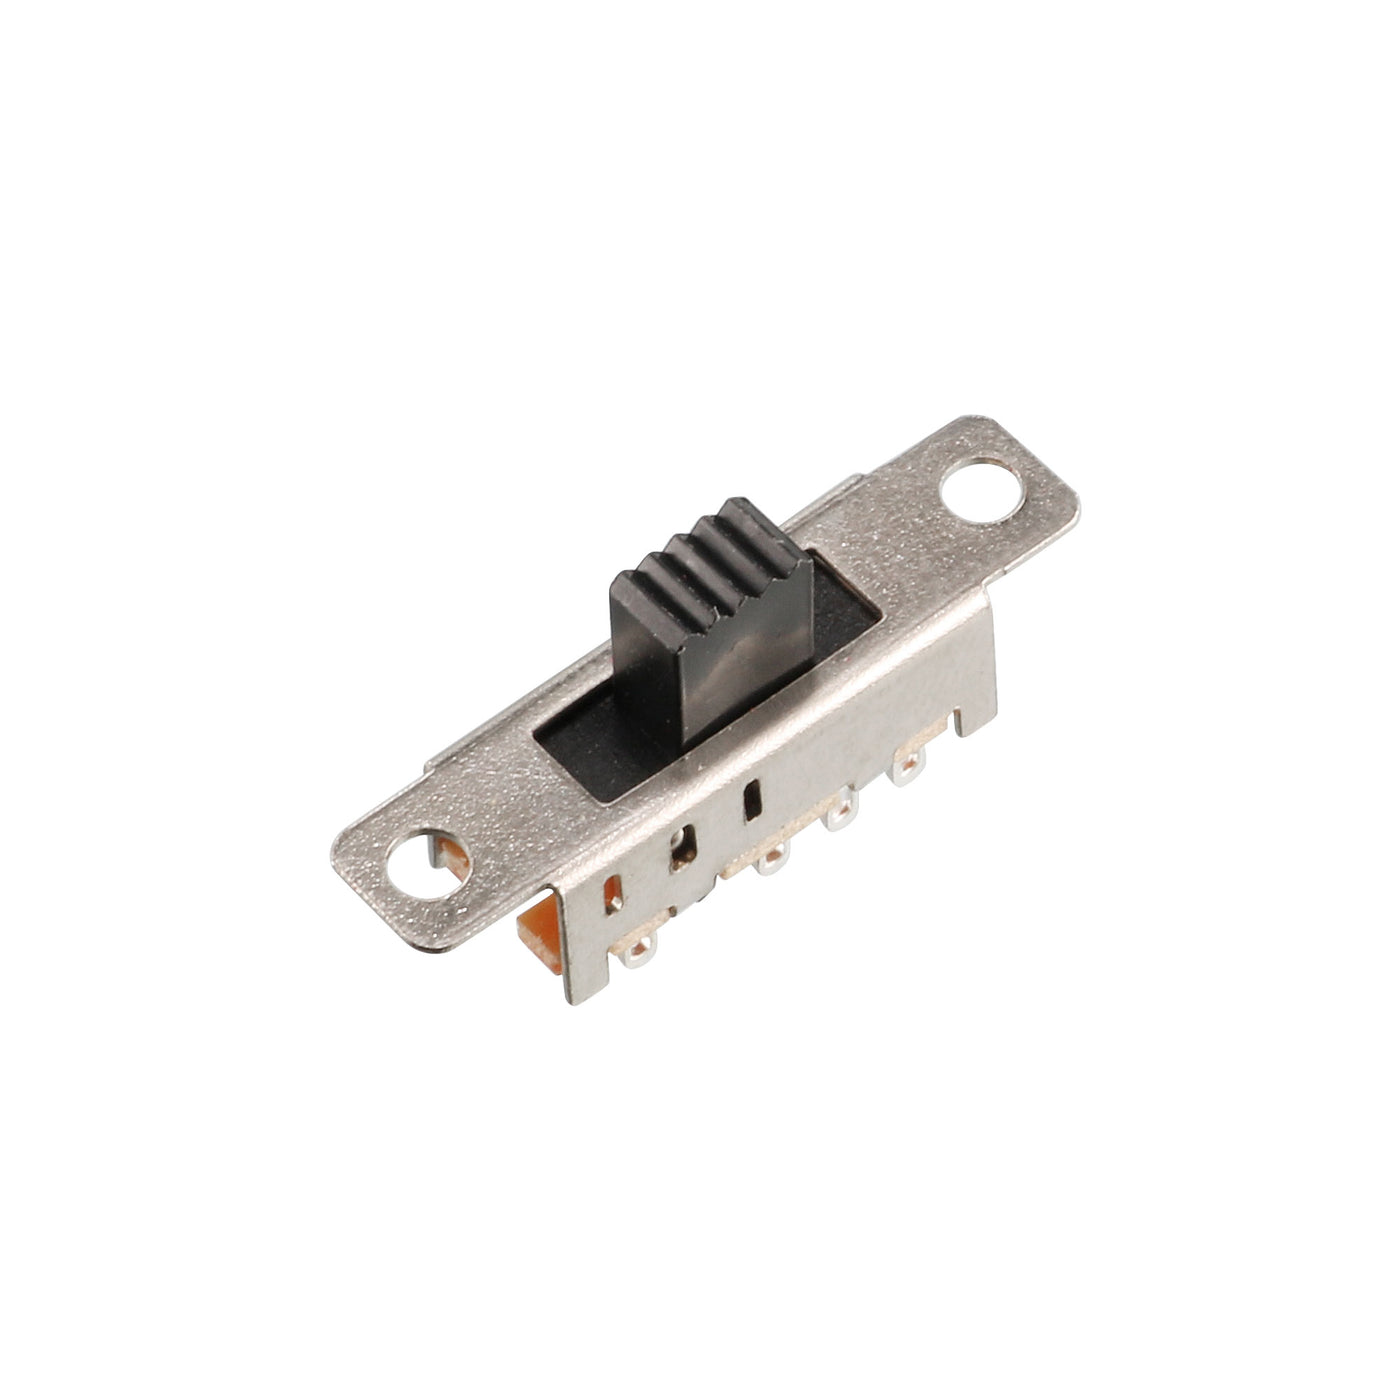 uxcell Uxcell 5 Pcs 8 Pin PCB 3 Position On/On/On DP3T 2P3T Panel Mini Slide Switch